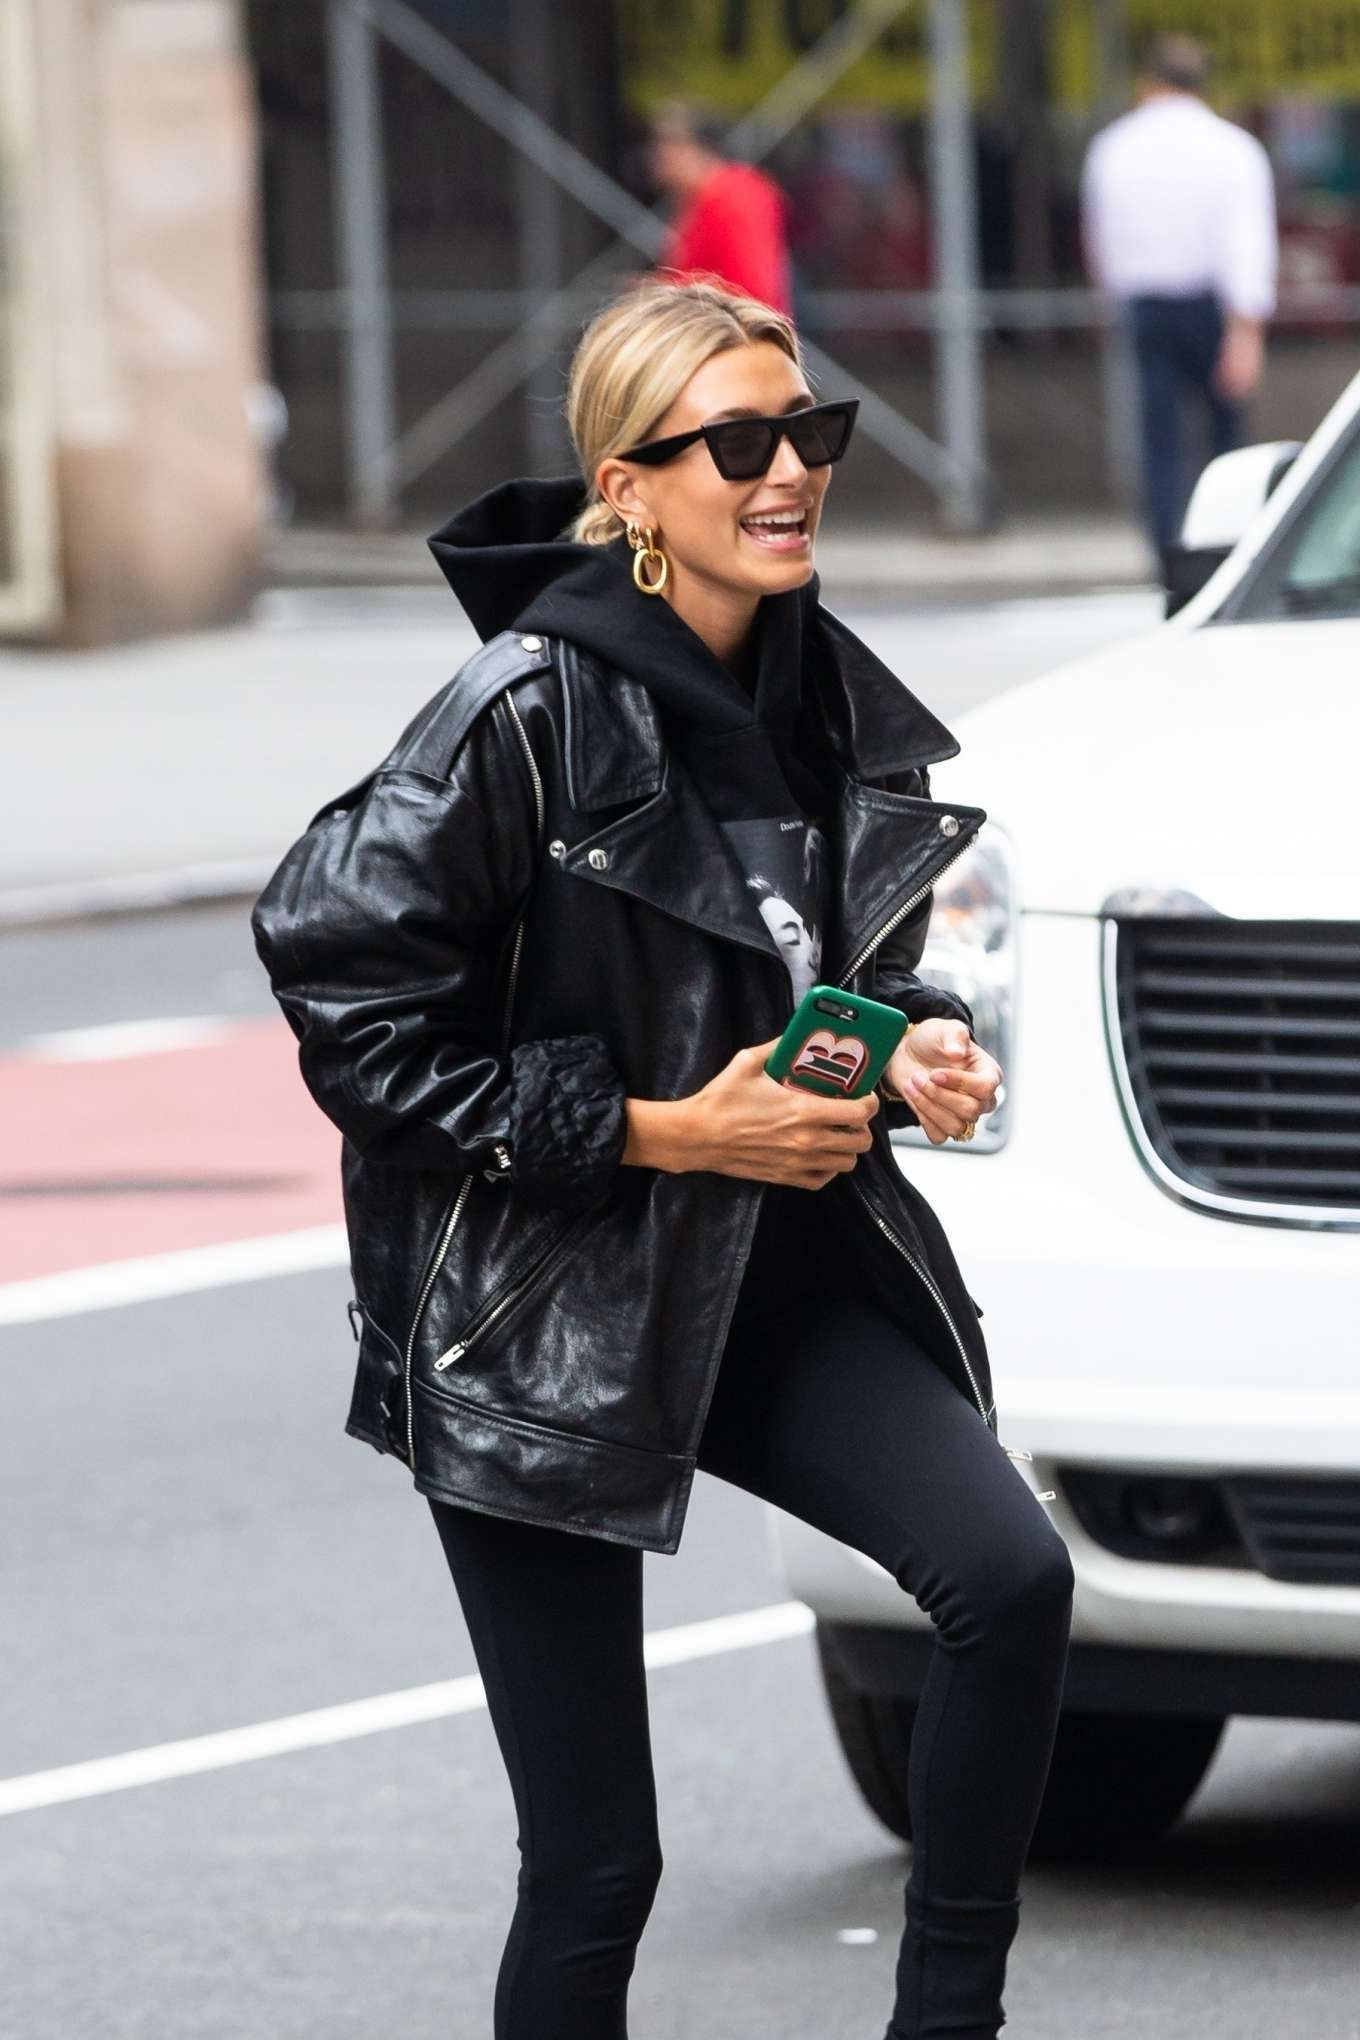 Hailey Bieber Goes Shopping, These Are The Black Denim Jeans She Buys - Hailey Bieber Goes Shopping, These Are The Black Denim Jeans She Buys -   14 fitness Style 2019 ideas